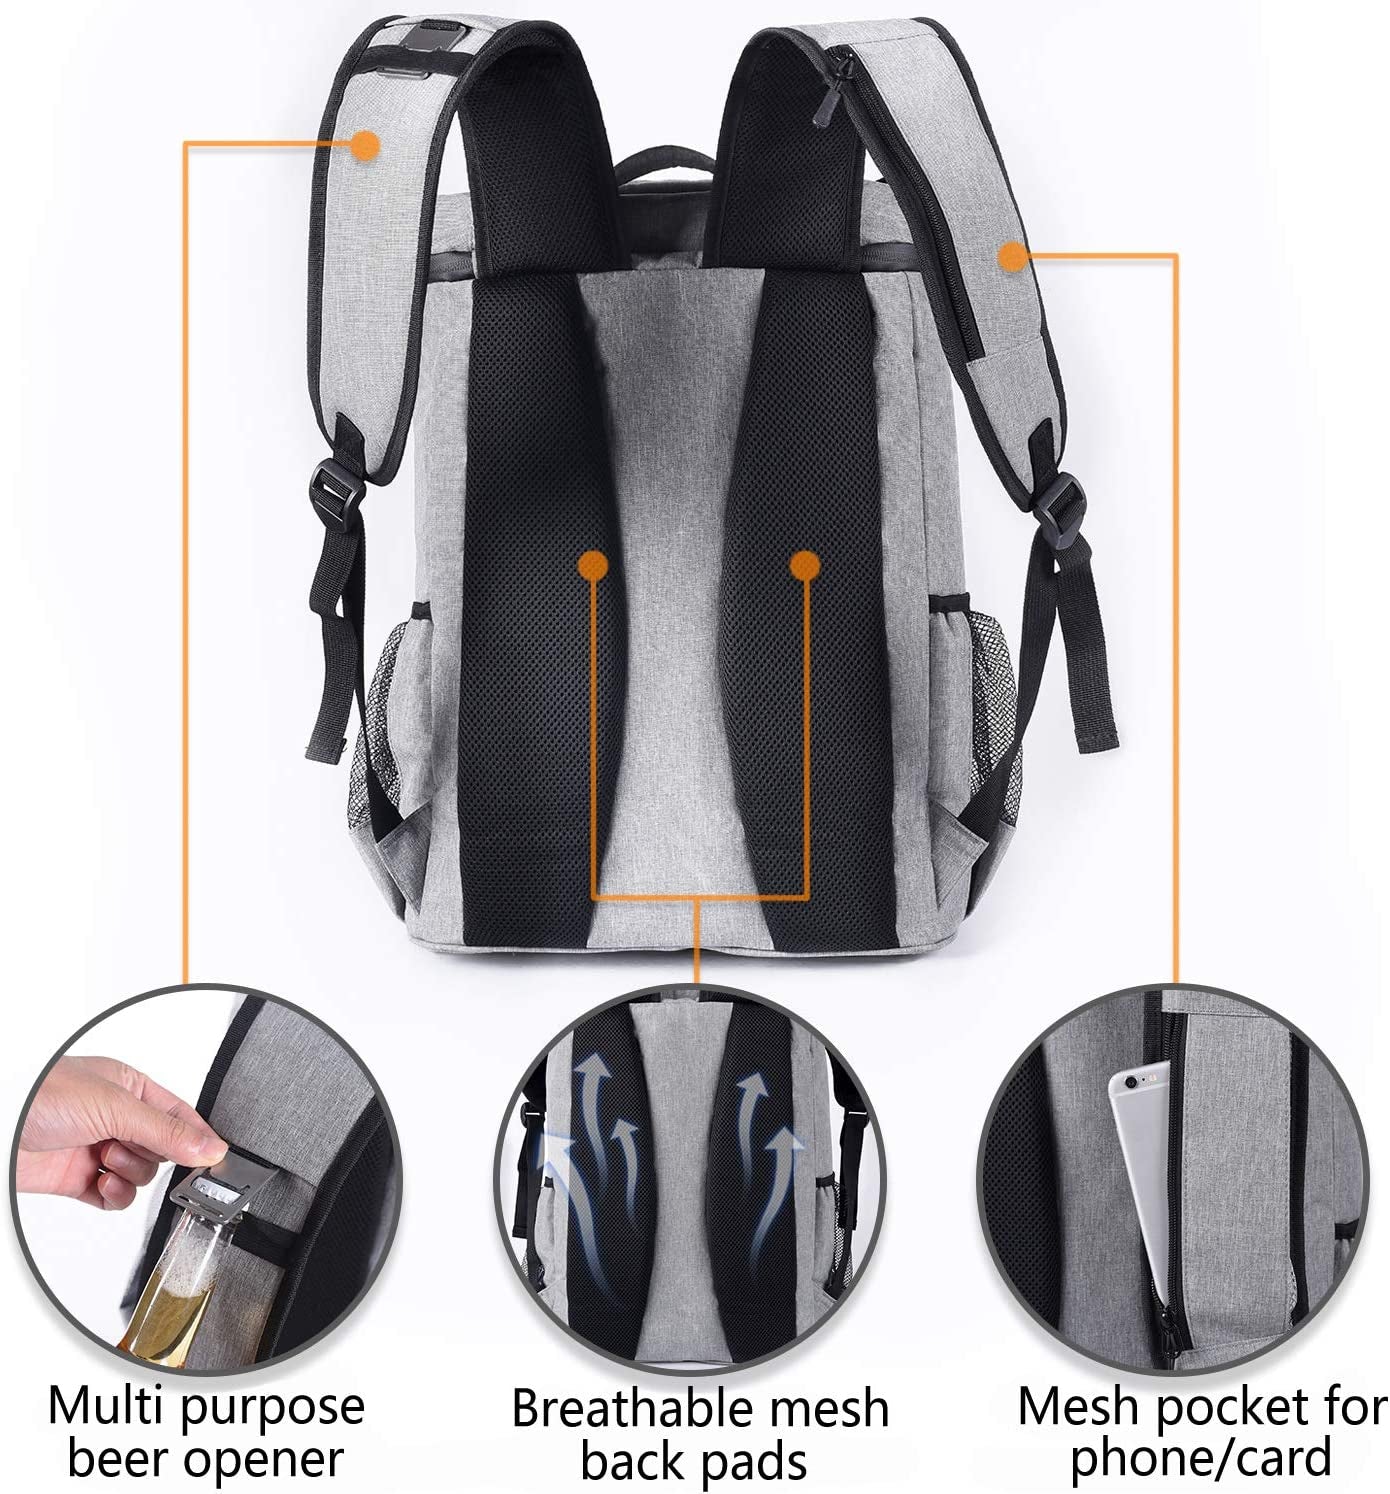  Leakproof Insulated Backpack Cooler - Your Ultimate Companion for Work, Picnics, and Adventures